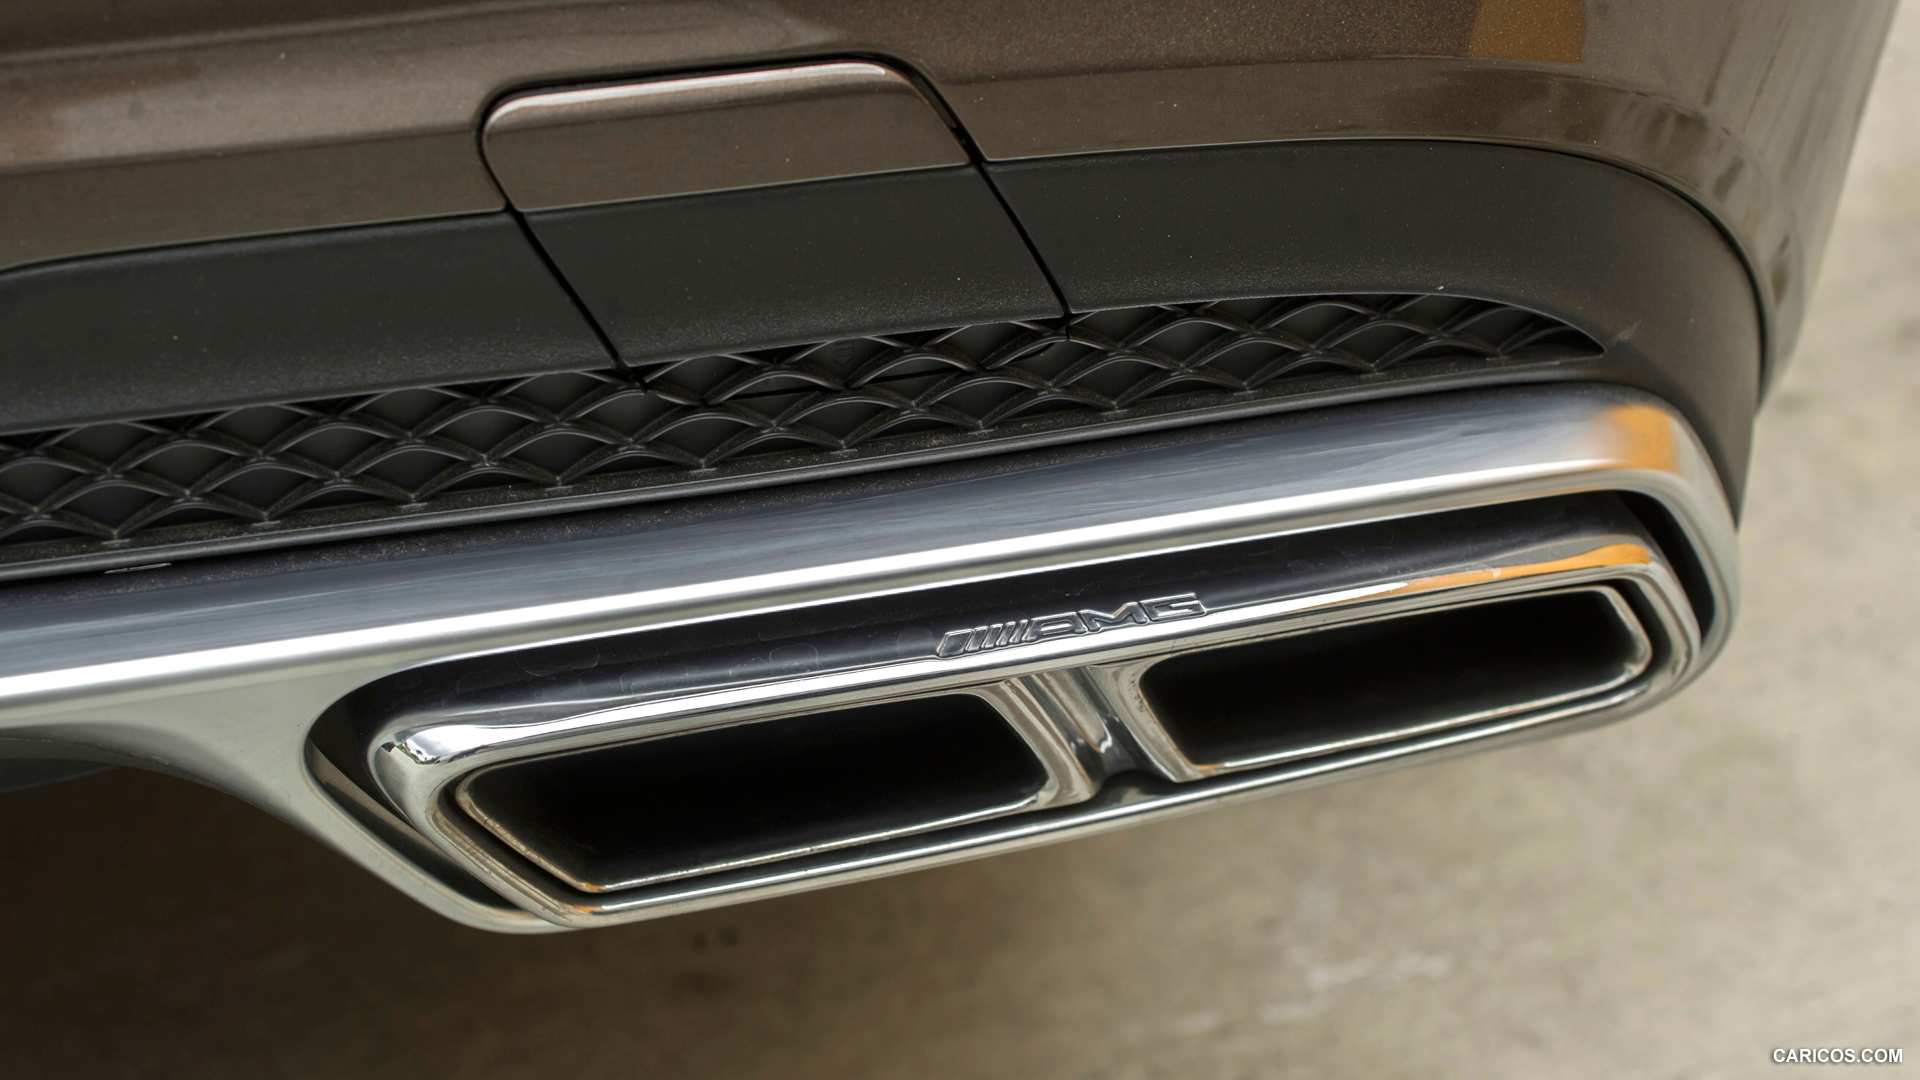  2014 Mercedes-Benz E 63 AMG S-Model Wagon (US Version) - Exhaust, #23 of 27